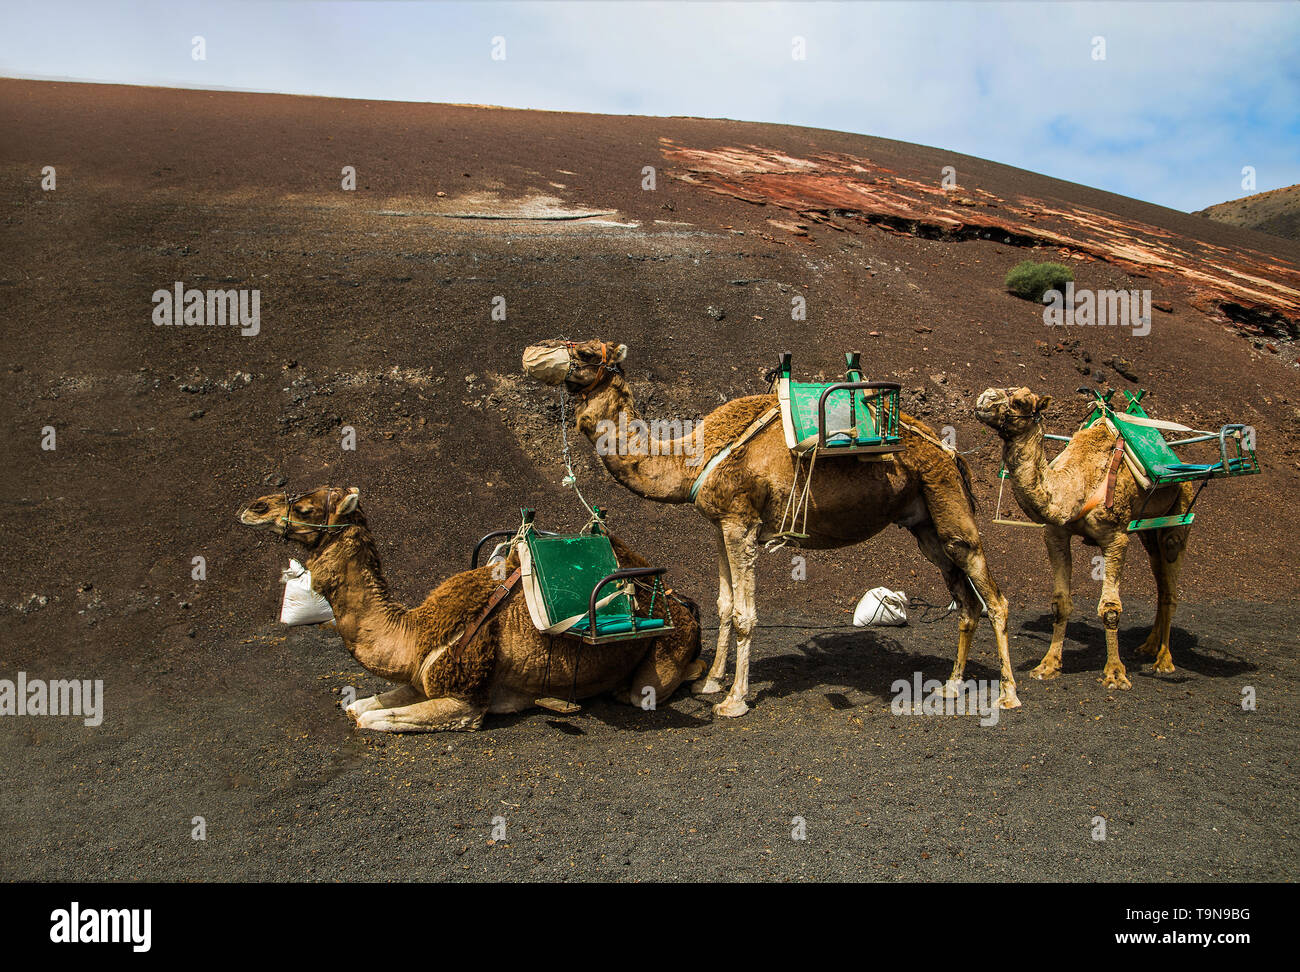 smal caravan of camels resting in the desert on the bown sand in sunny day Stock Photo